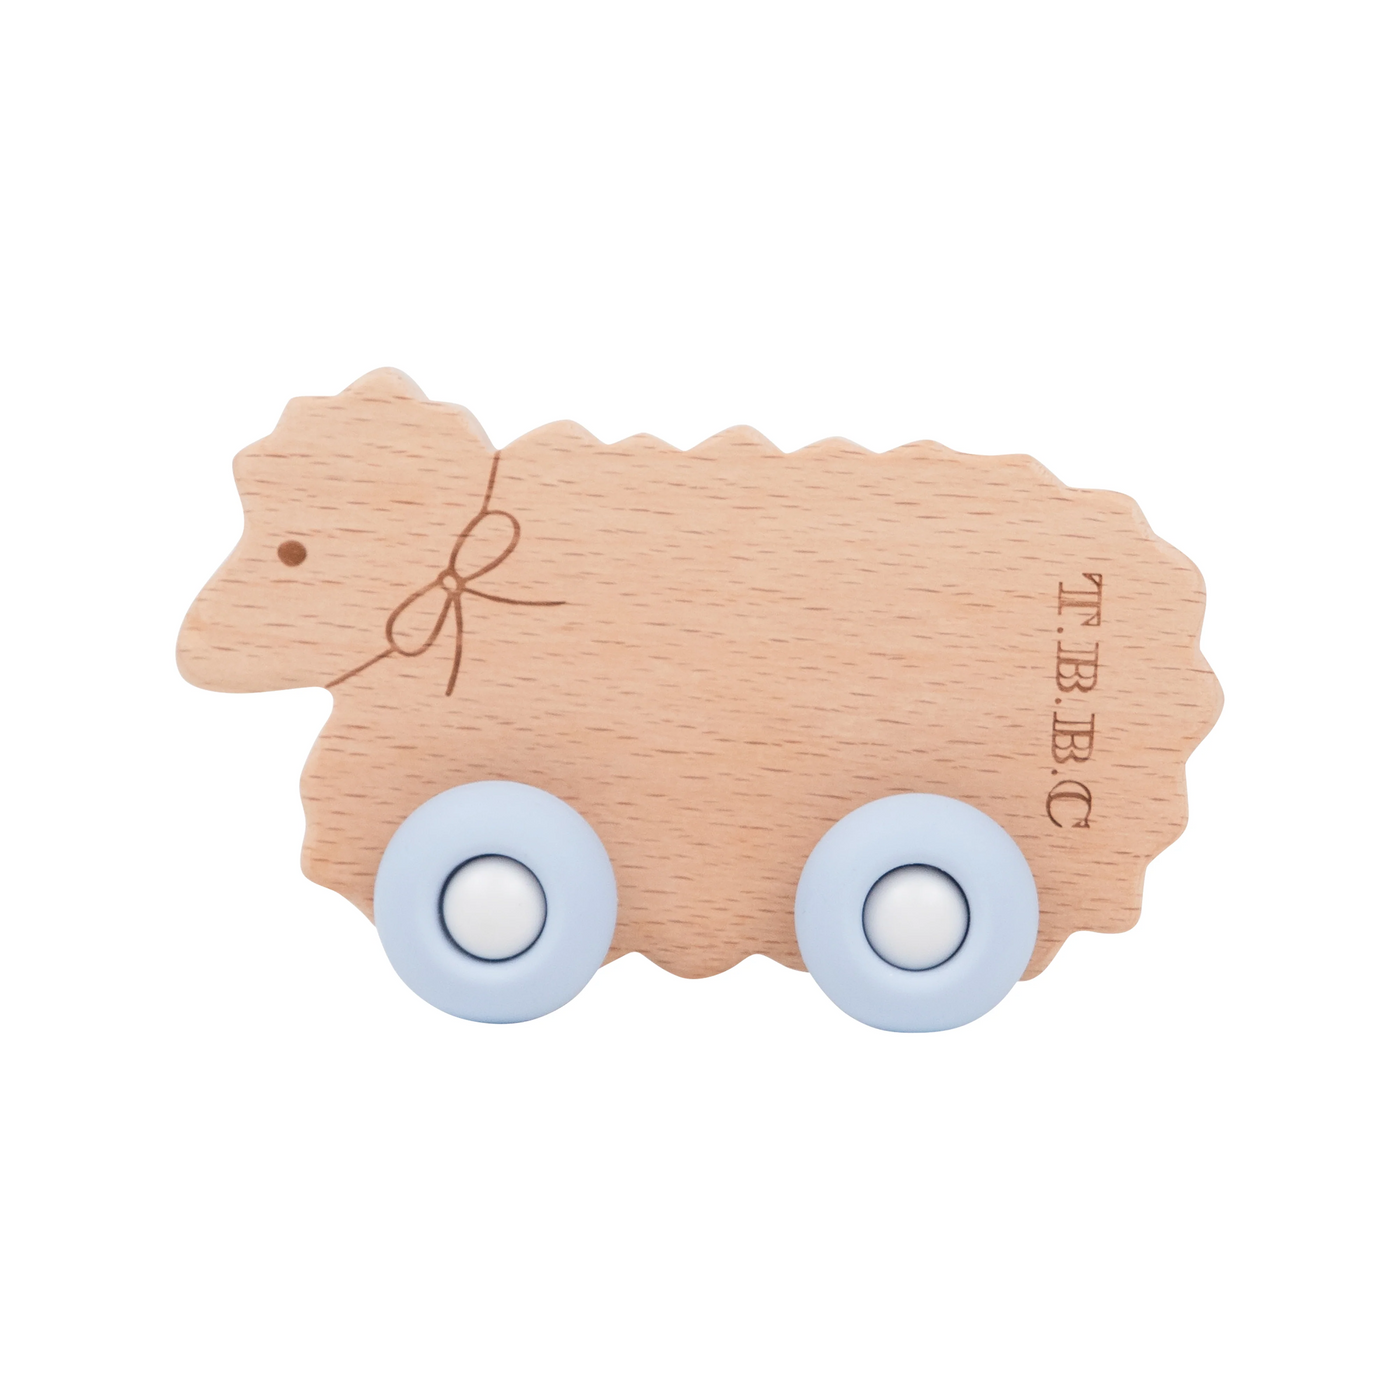 GooseWaddle X T.B.B.C. Wooden & Silicone Teether